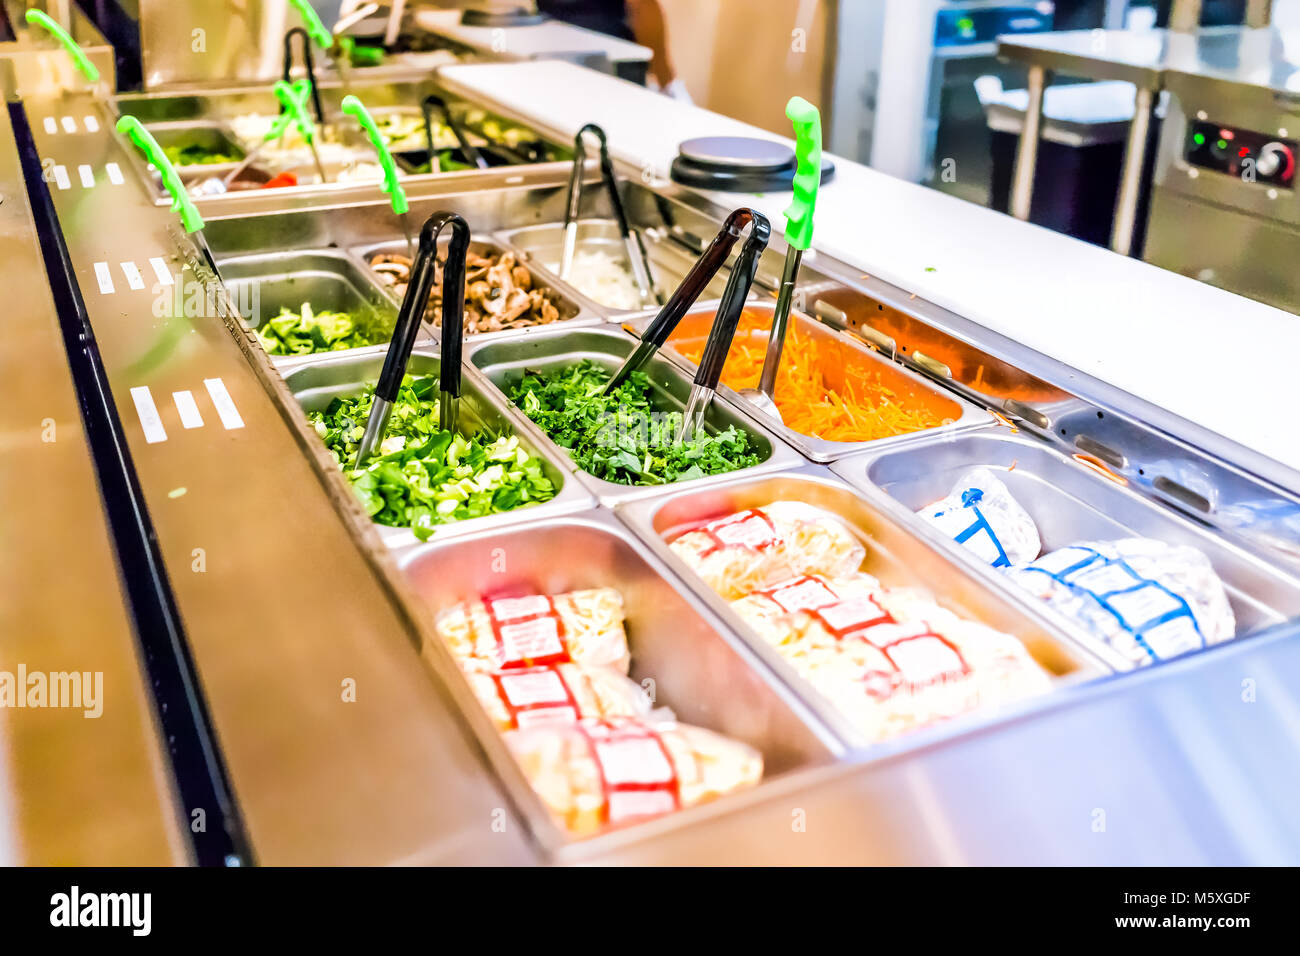 Restaurant buffet serving counter with salad vegetables, celery, kale, carrots, sprouts Stock Photo